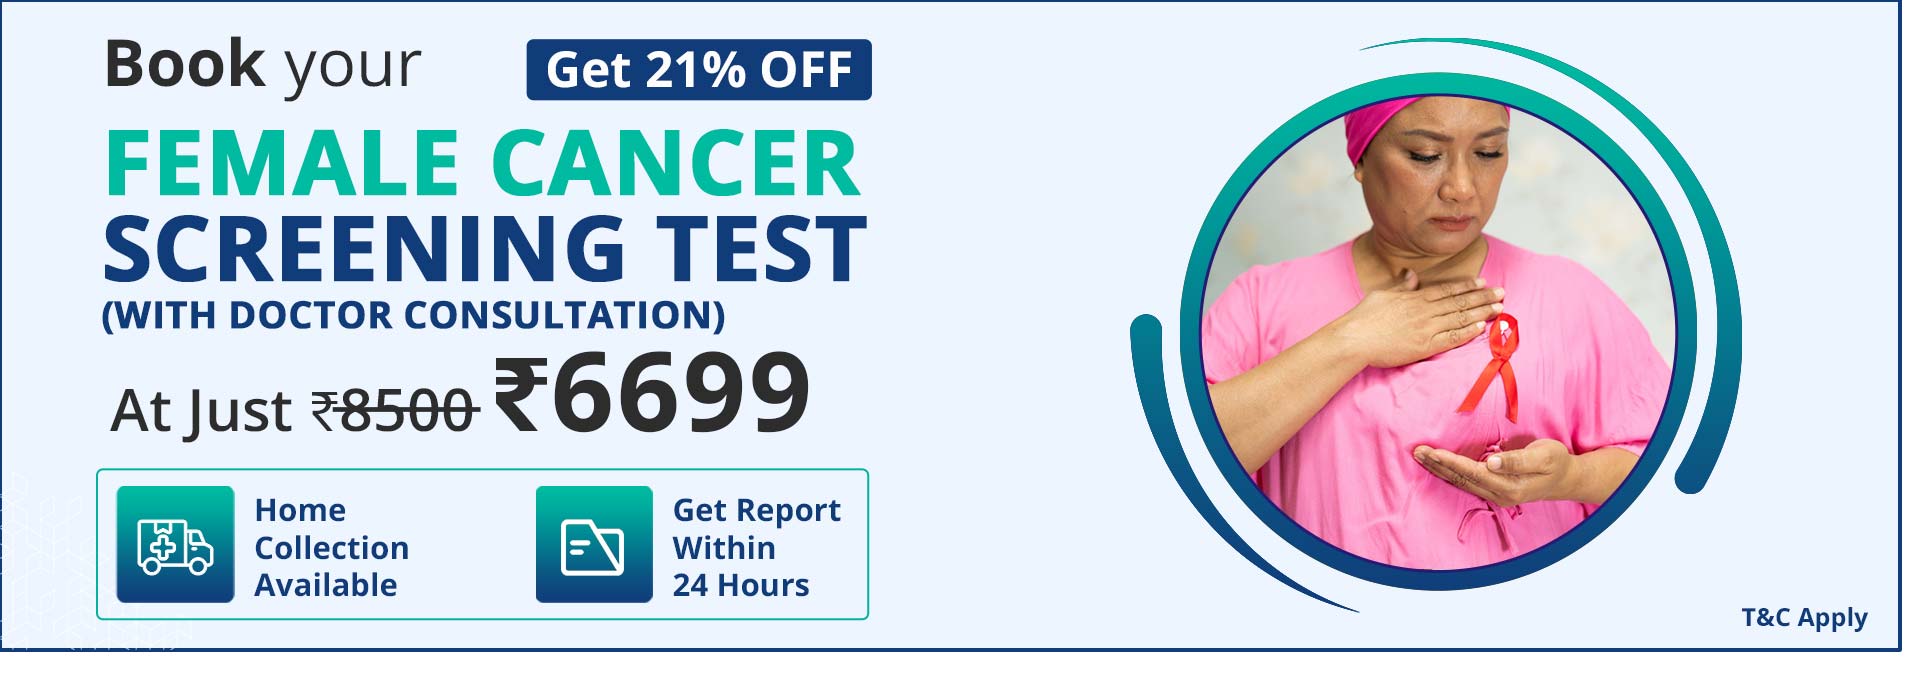 Female Cancer Screening Test With Doctor Consultation Gurgaon Female